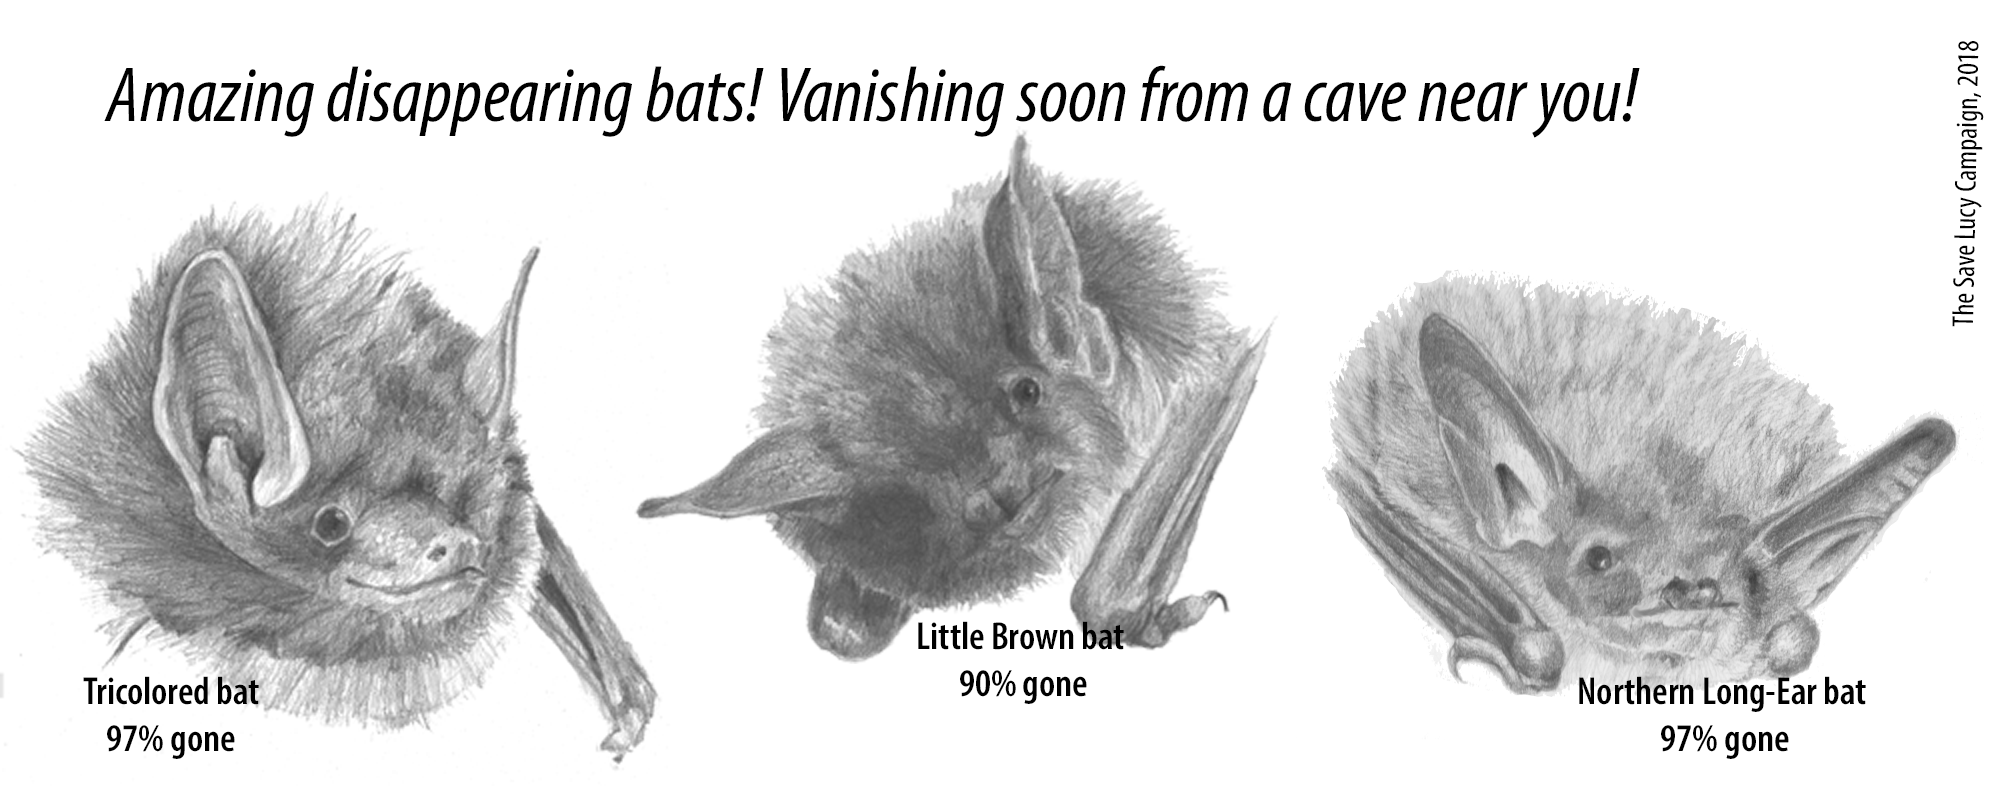 Pencil drawings of a tricolor bat, a little brown bat, and a northern long-ear bat, with the caption "Amazing disappearing bats! Vanishing soon from a cave near you!"